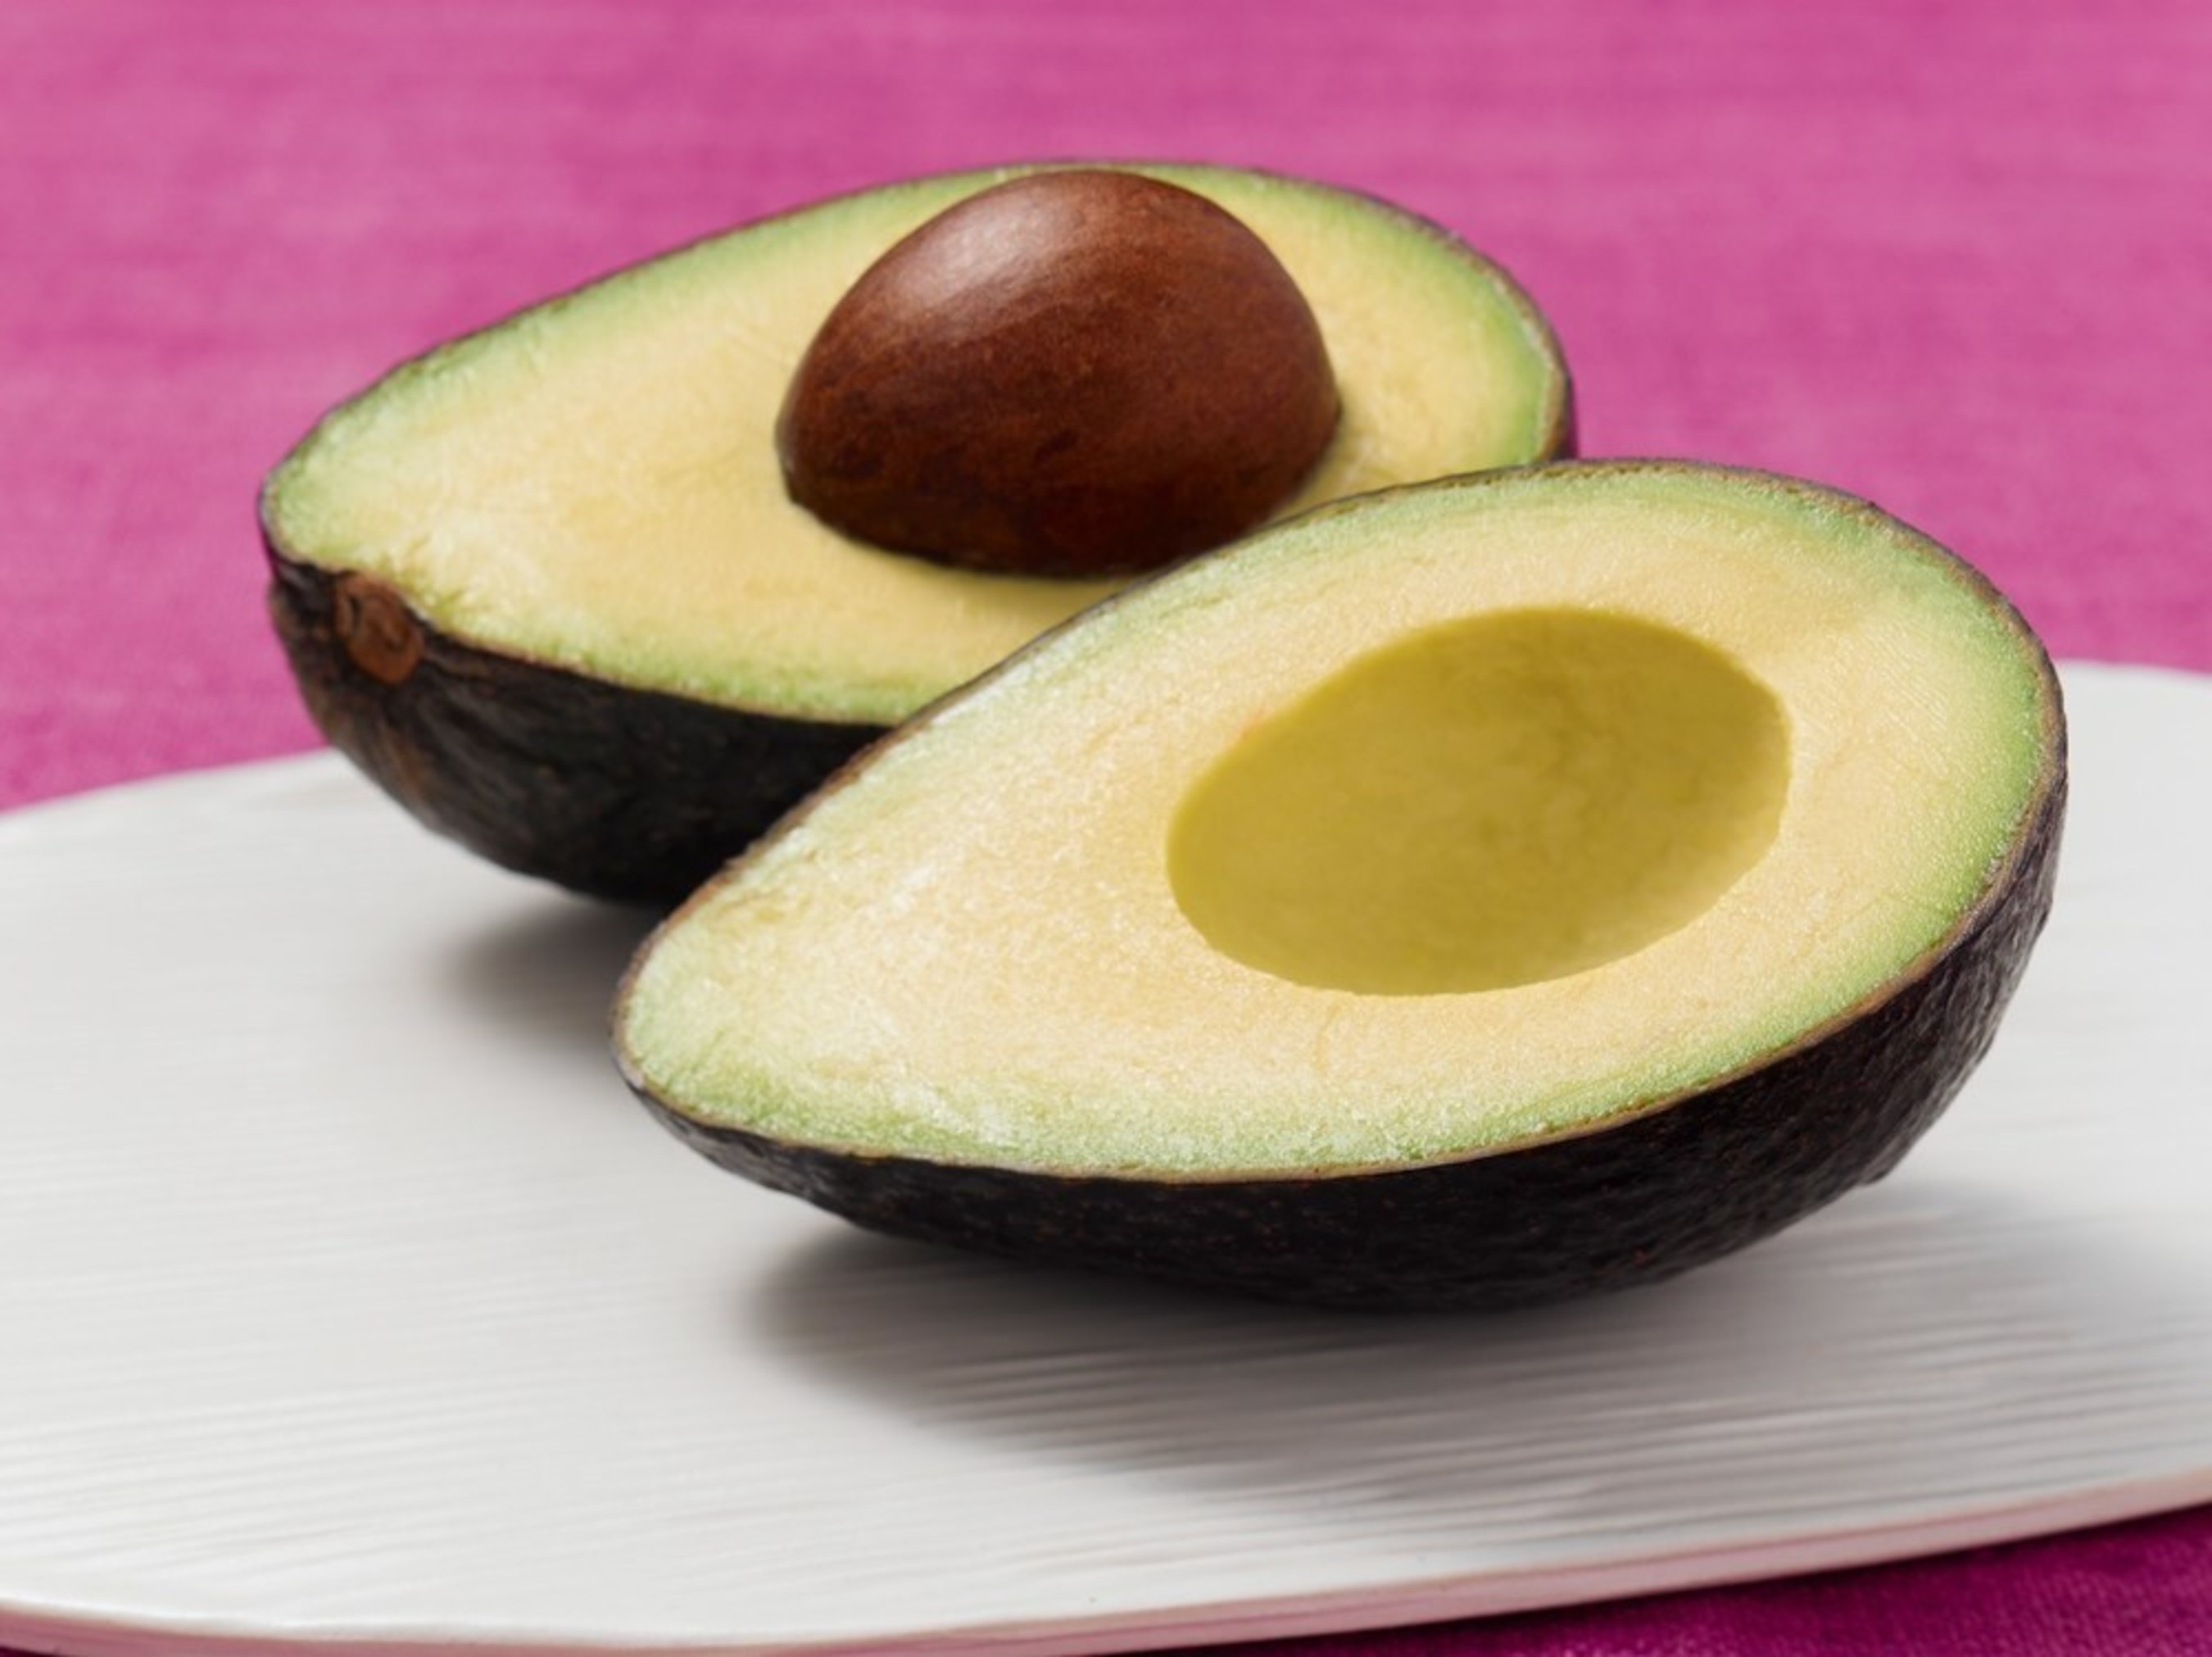 New Research Explores Effects of Moderate Fat Diets That Include Avocados